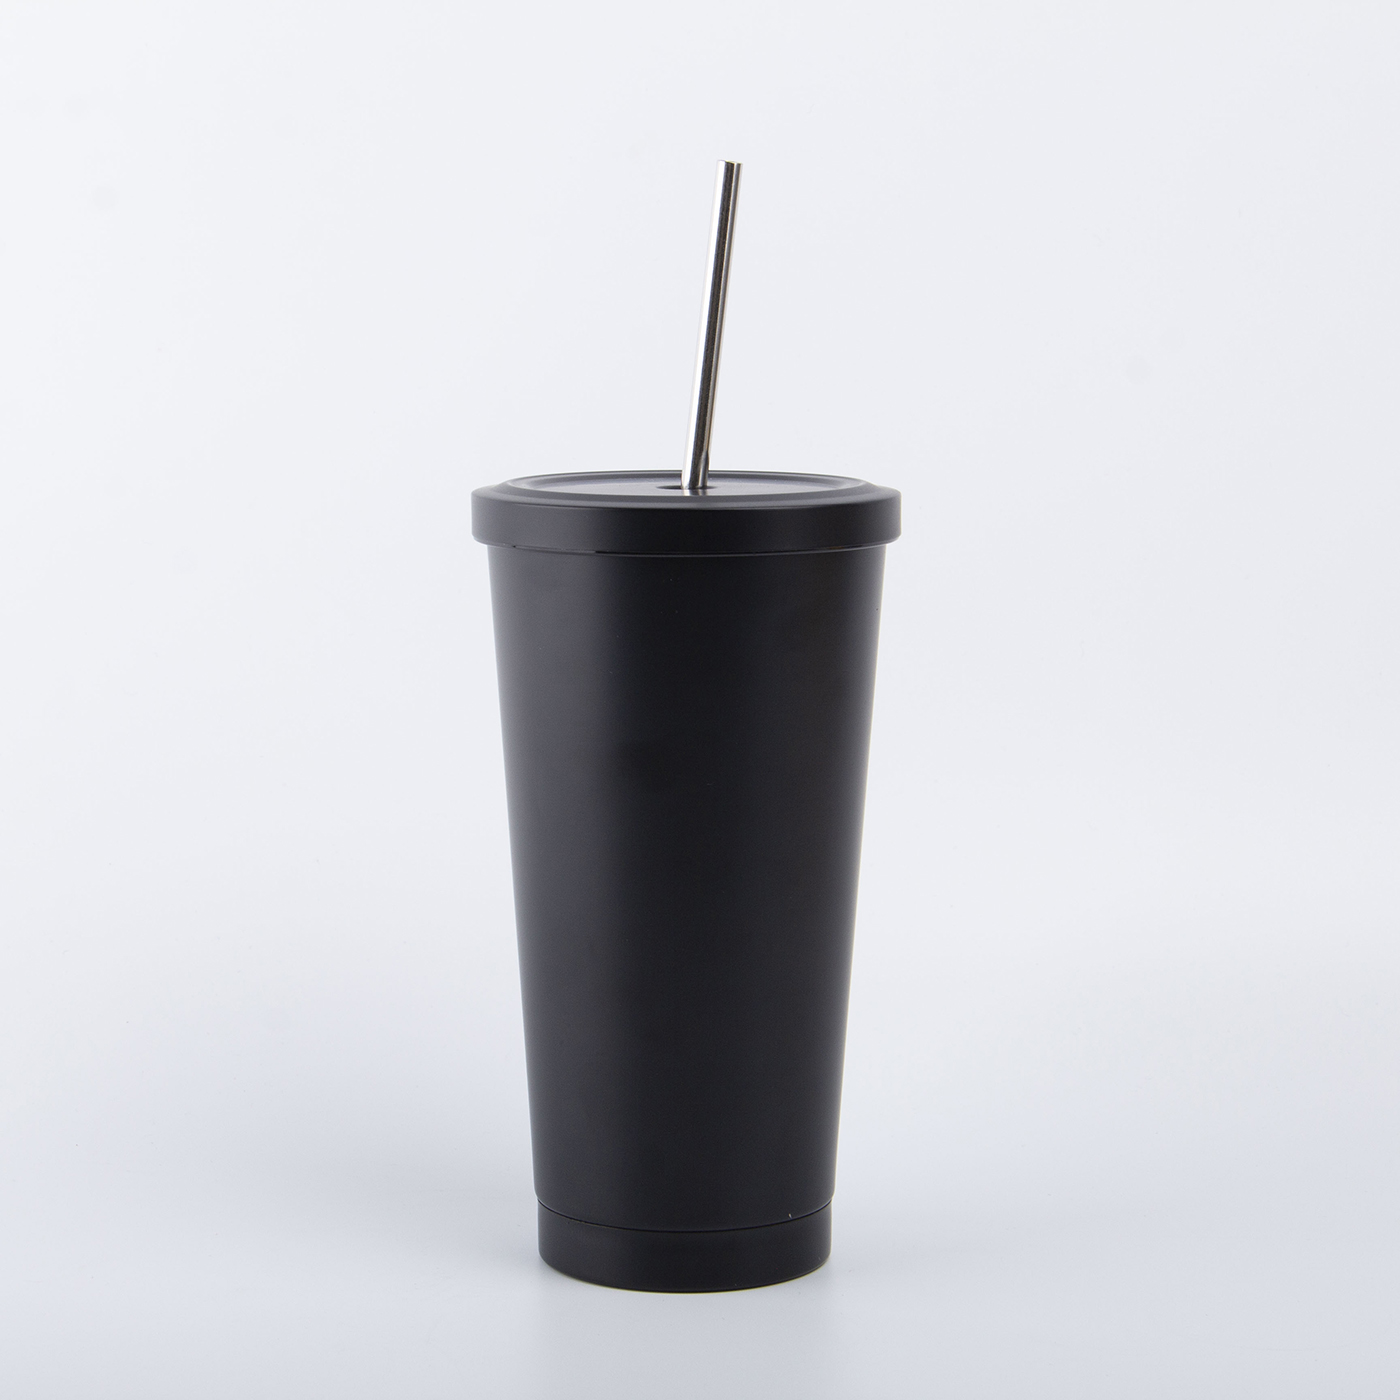 22 oz. Stainless Steel Tumbler With Straw4